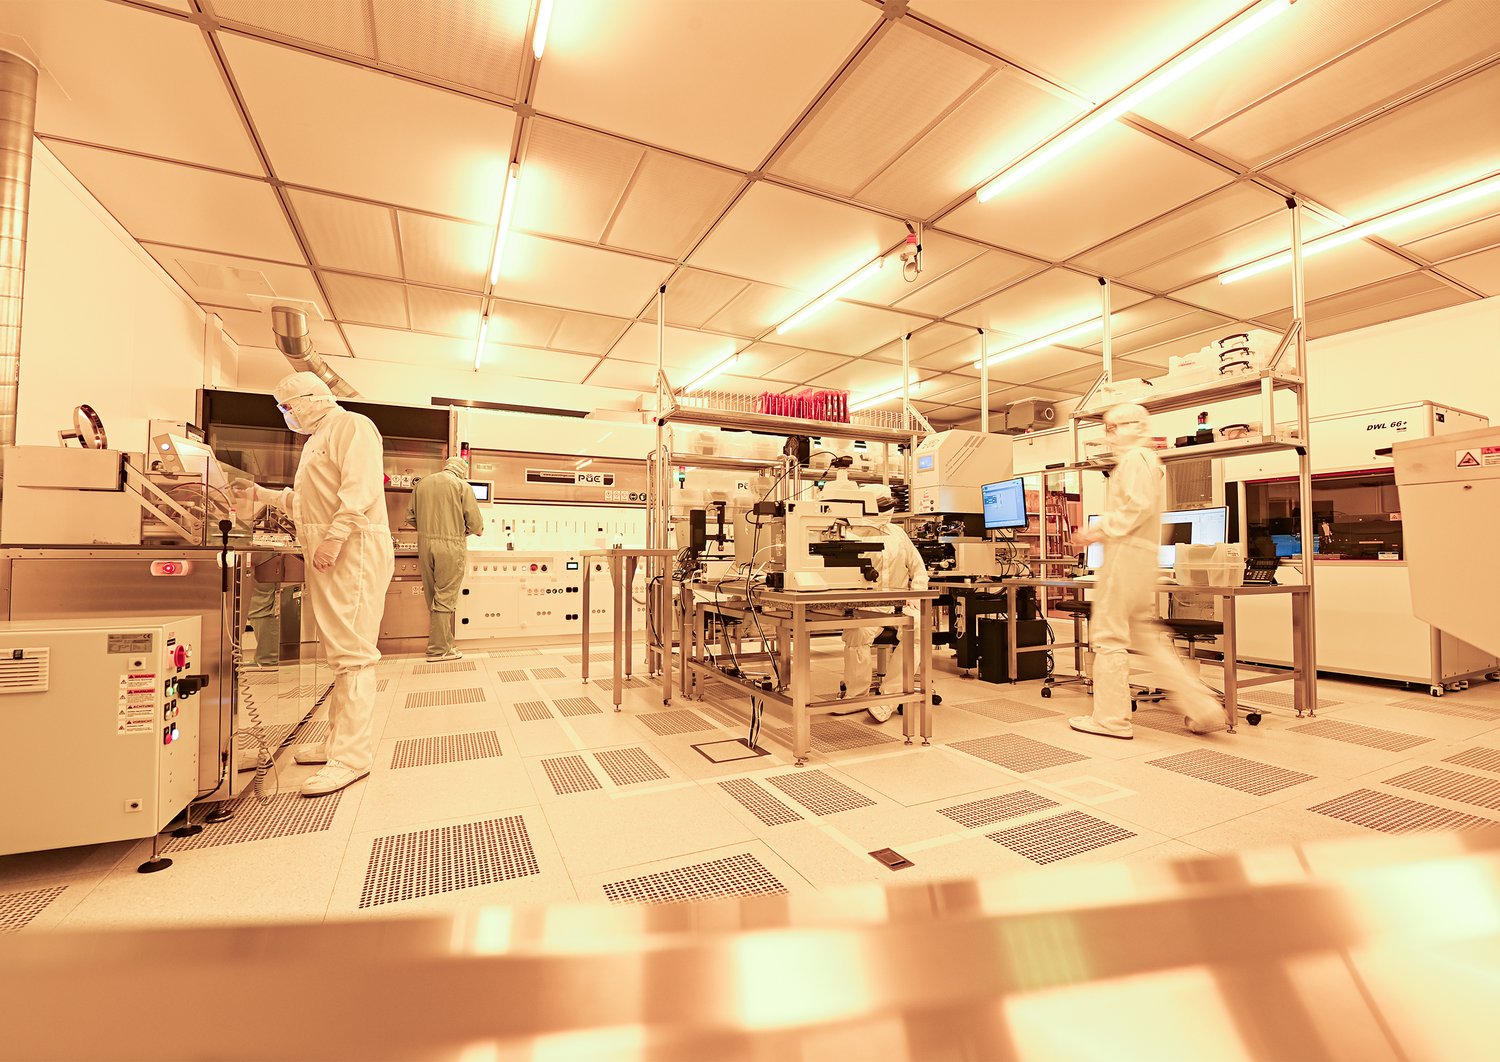 Researchers working in a cleanroom